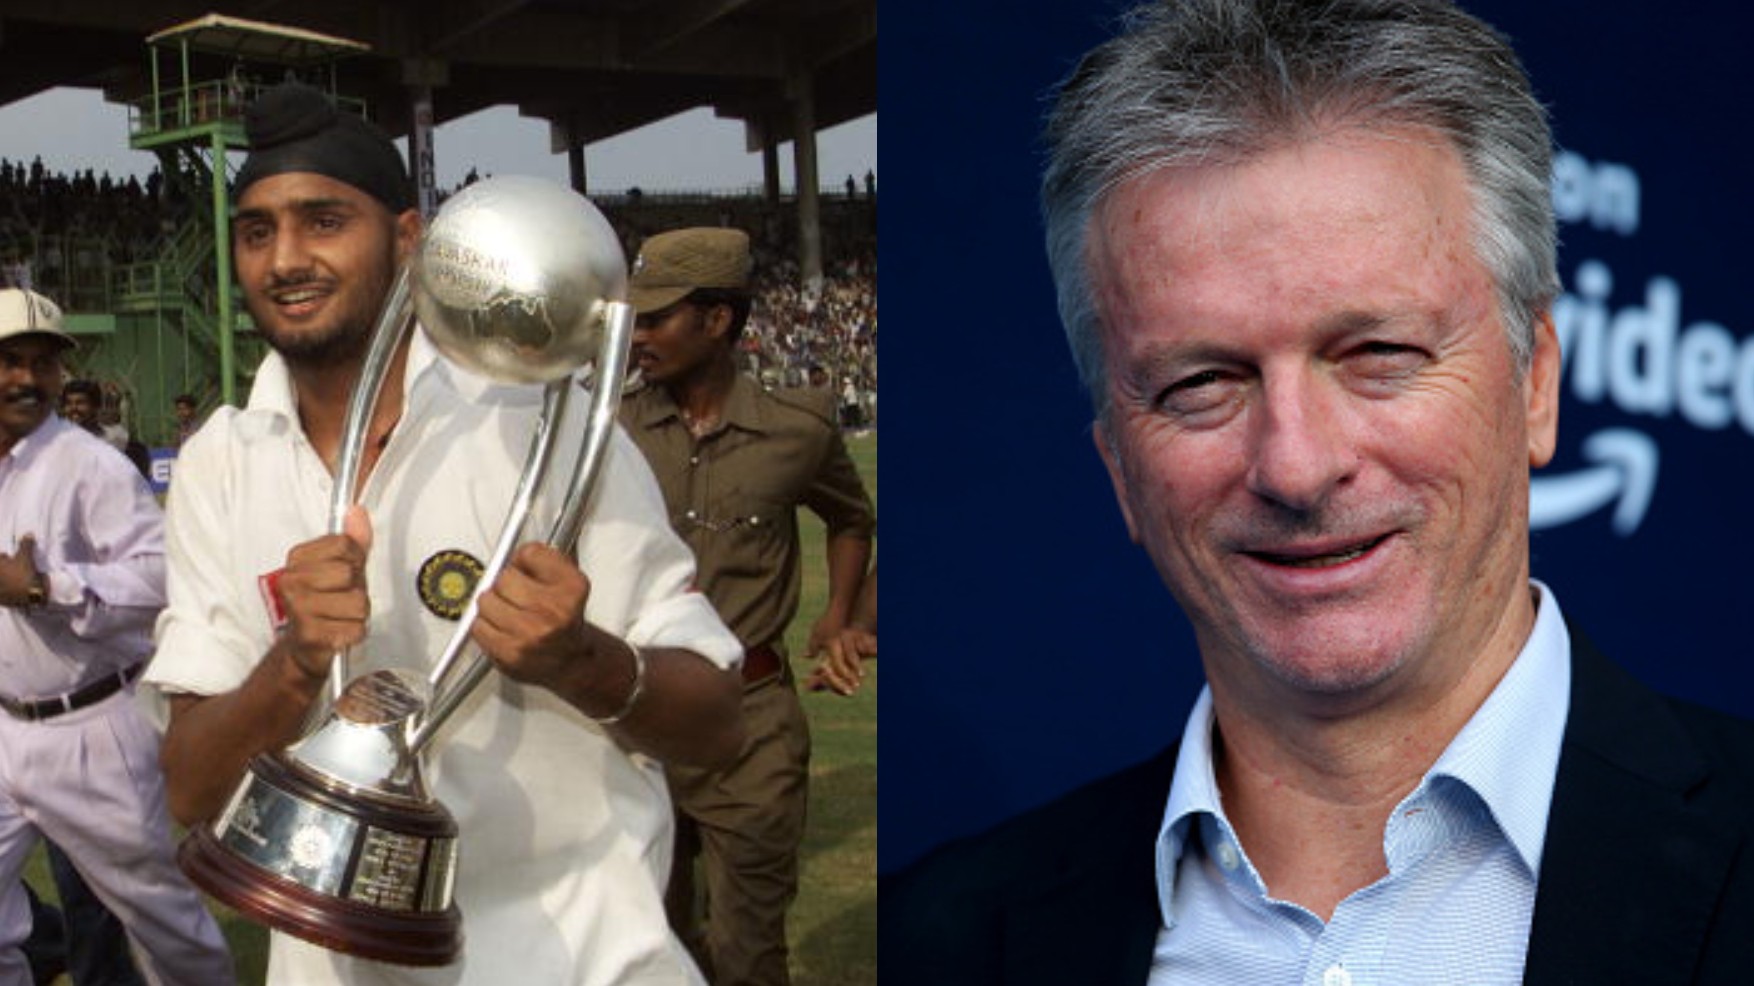 WATCH- Steve Waugh lauds Harbhajan Singh, says Australia would have won in 2001 if not for him